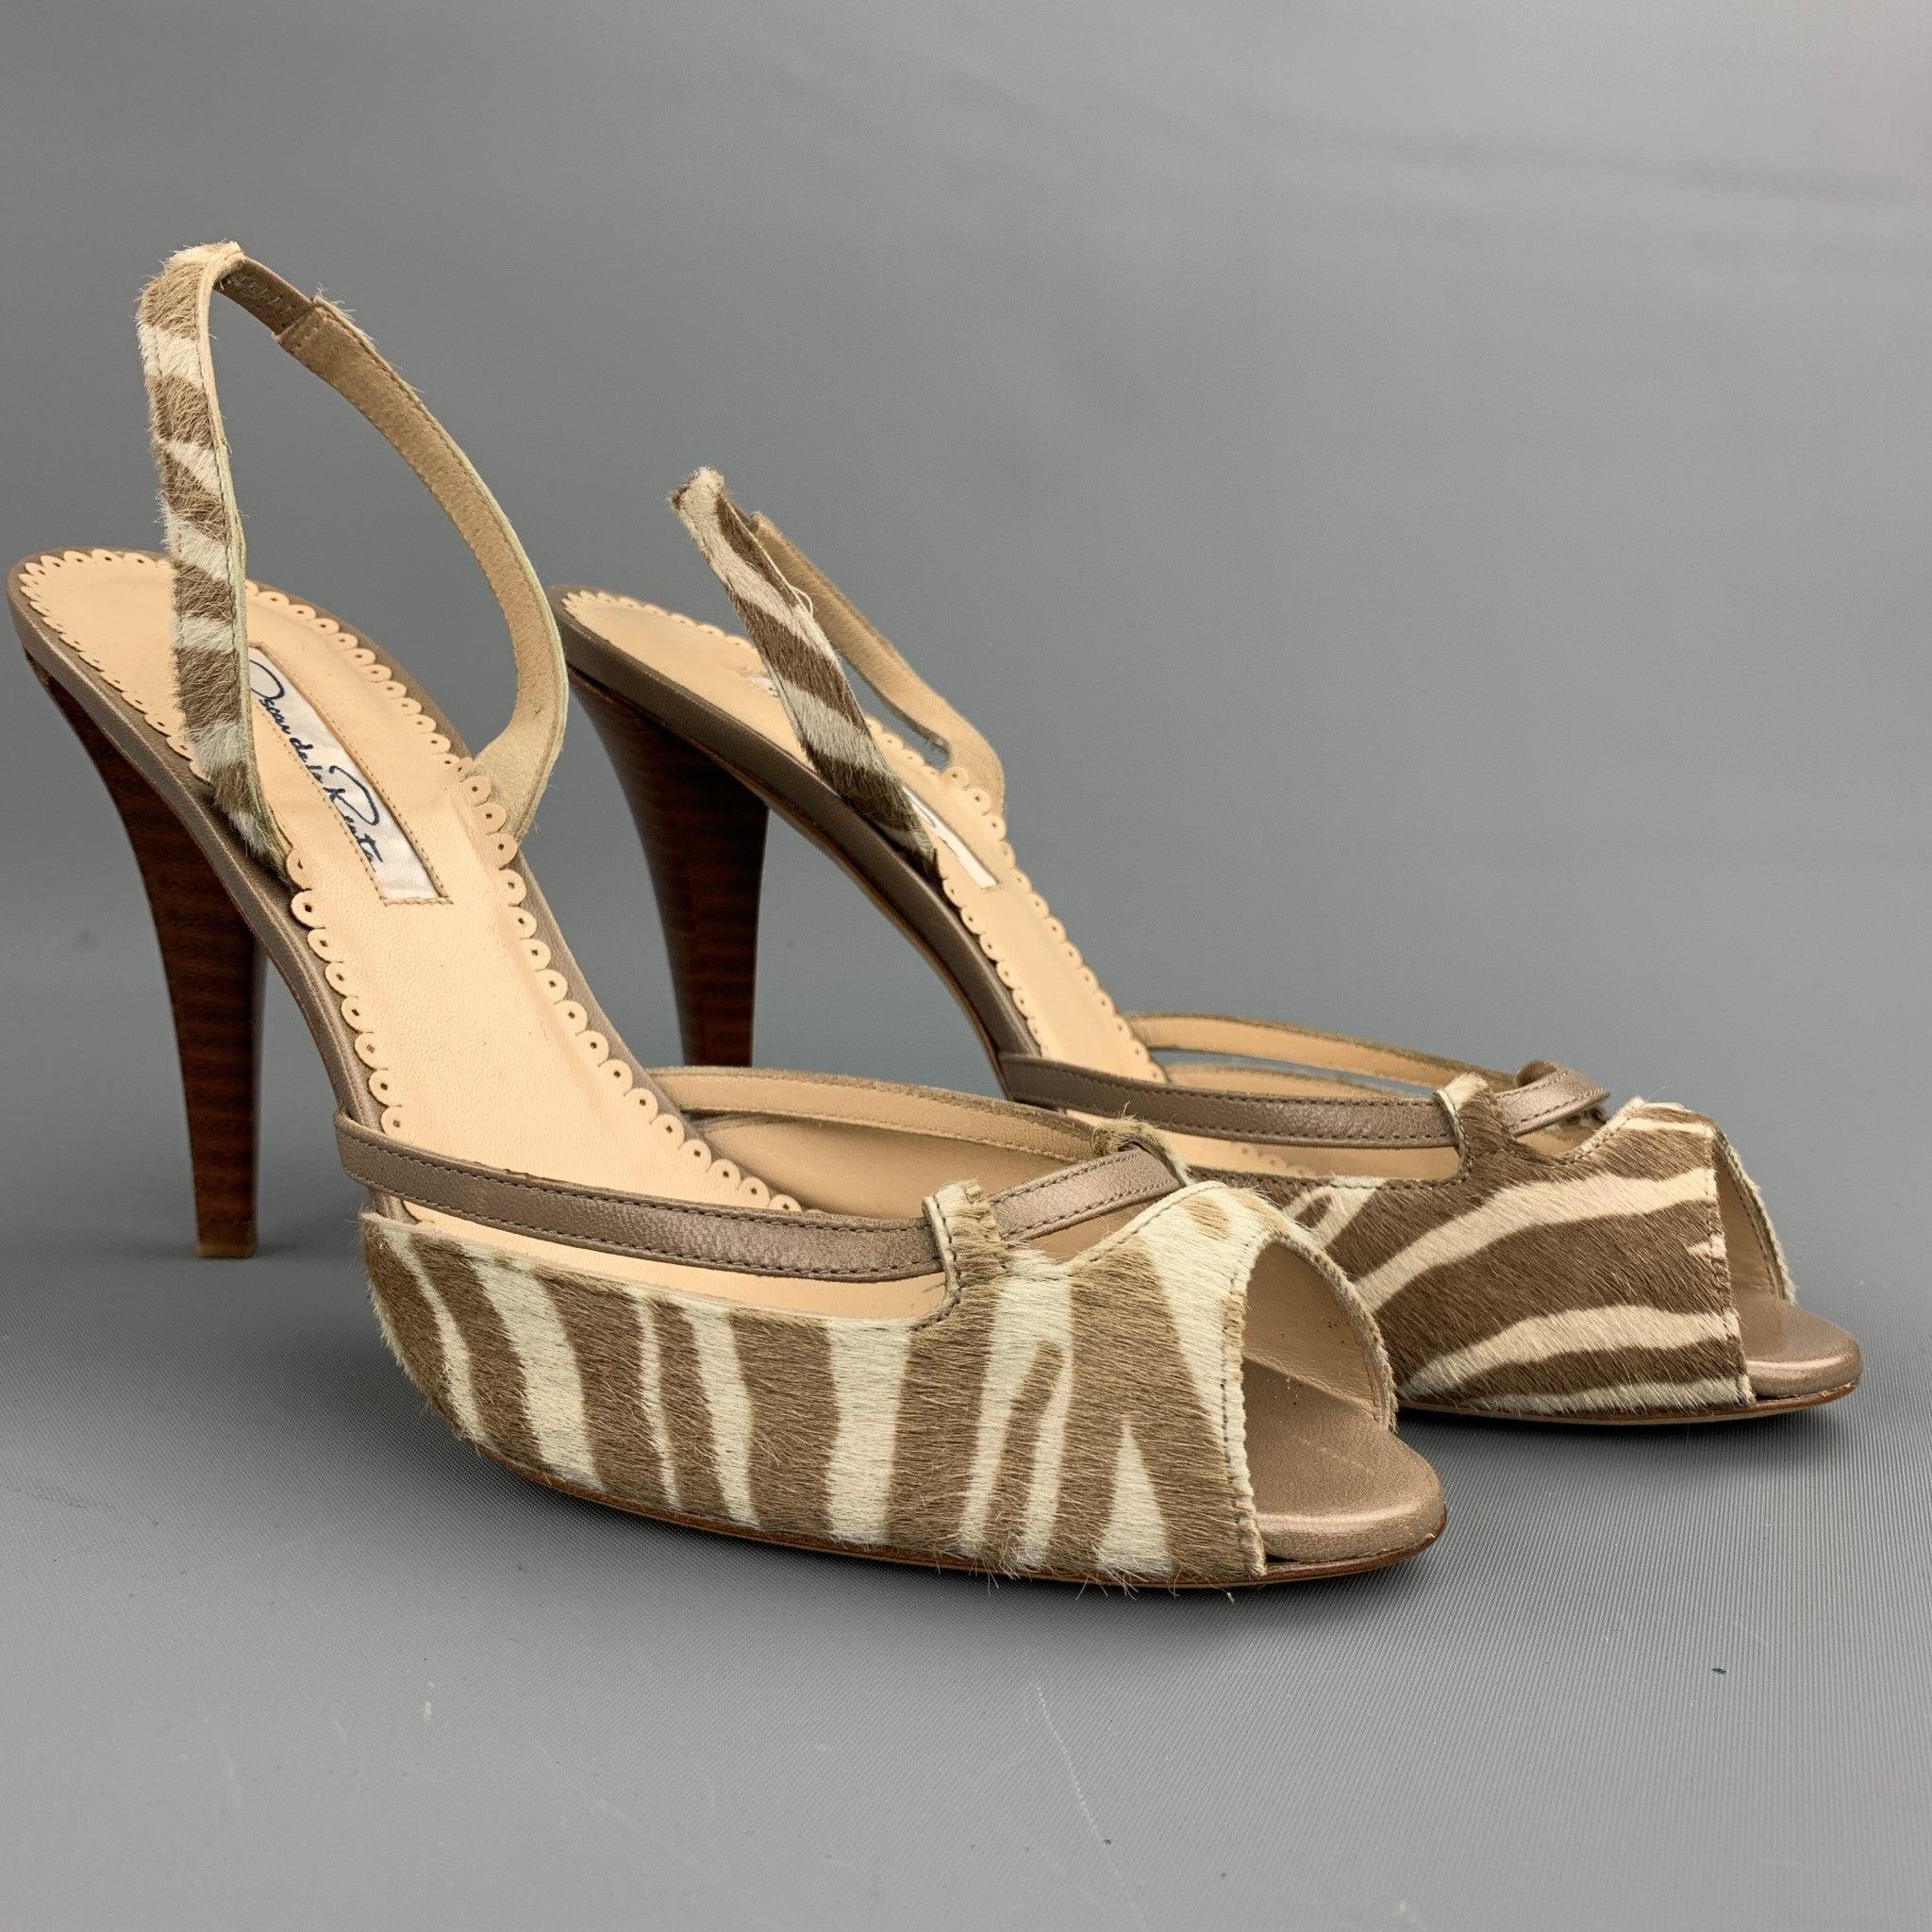 OSCAR DE LA RENTA sandals comes in a off white and taupe tiger zebra print pony hair leather and feature a peep toe with unique cutout details with taupe leather strap, sling back, and a thick neutral brown stacked heel. Faded discoloration on right